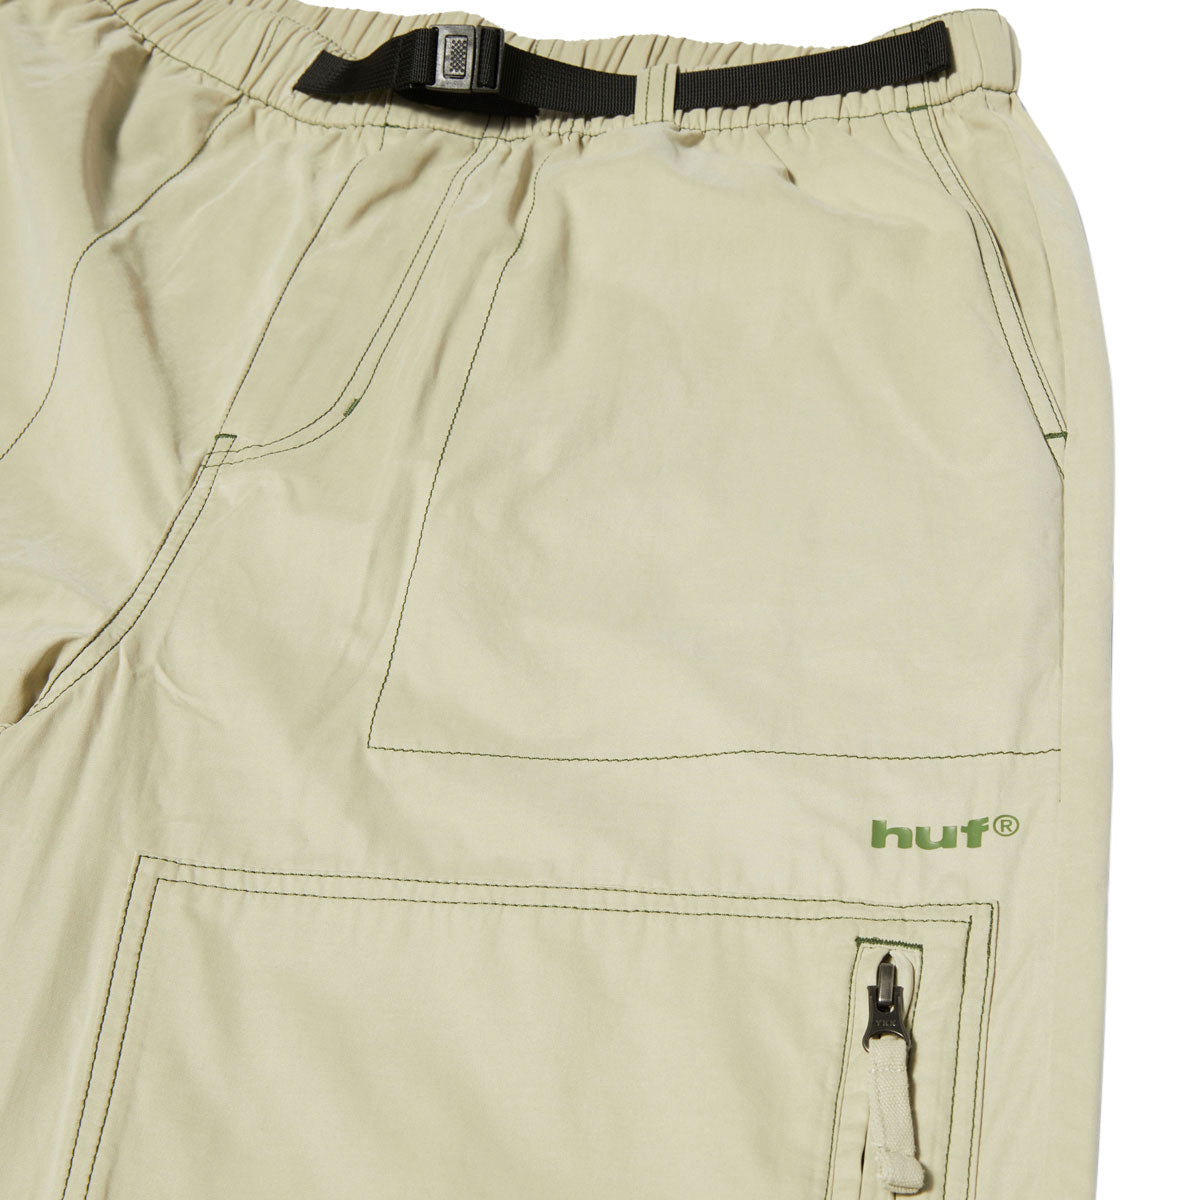 HUF Loma Tech Pants - Biscuit image 3